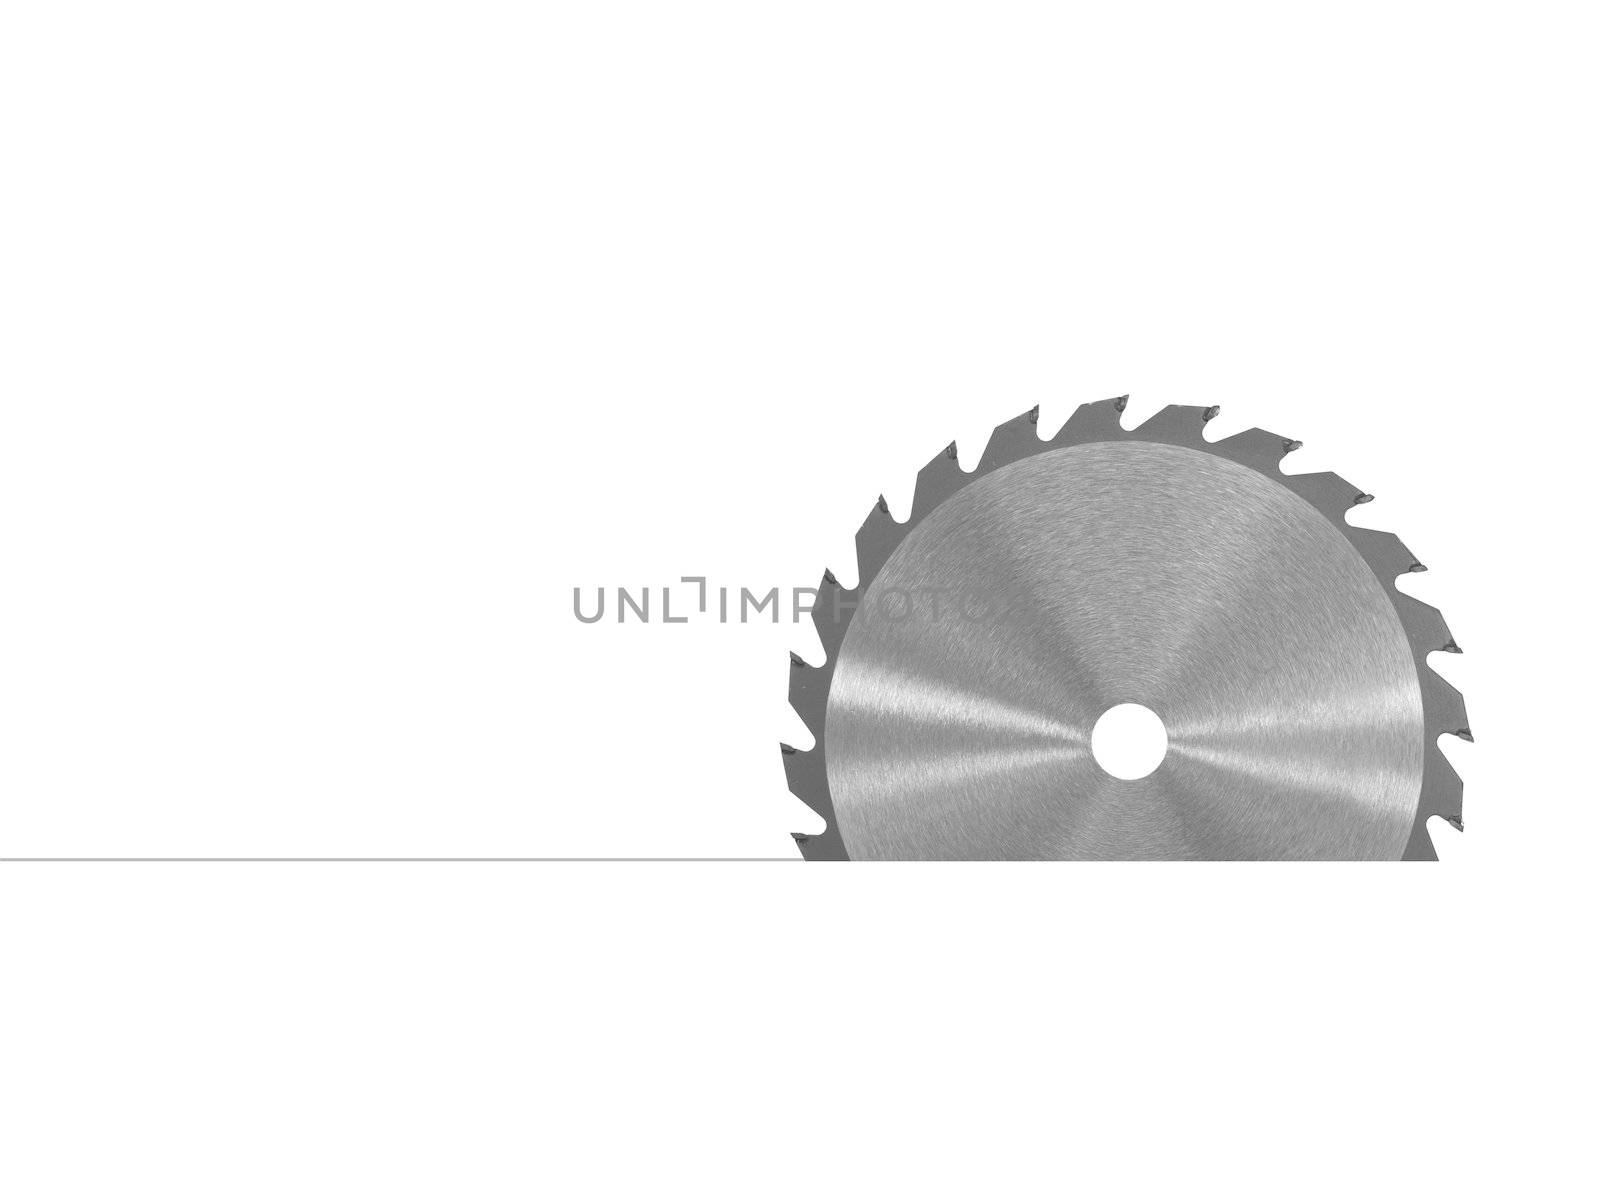 A saw blade isolated against a white background